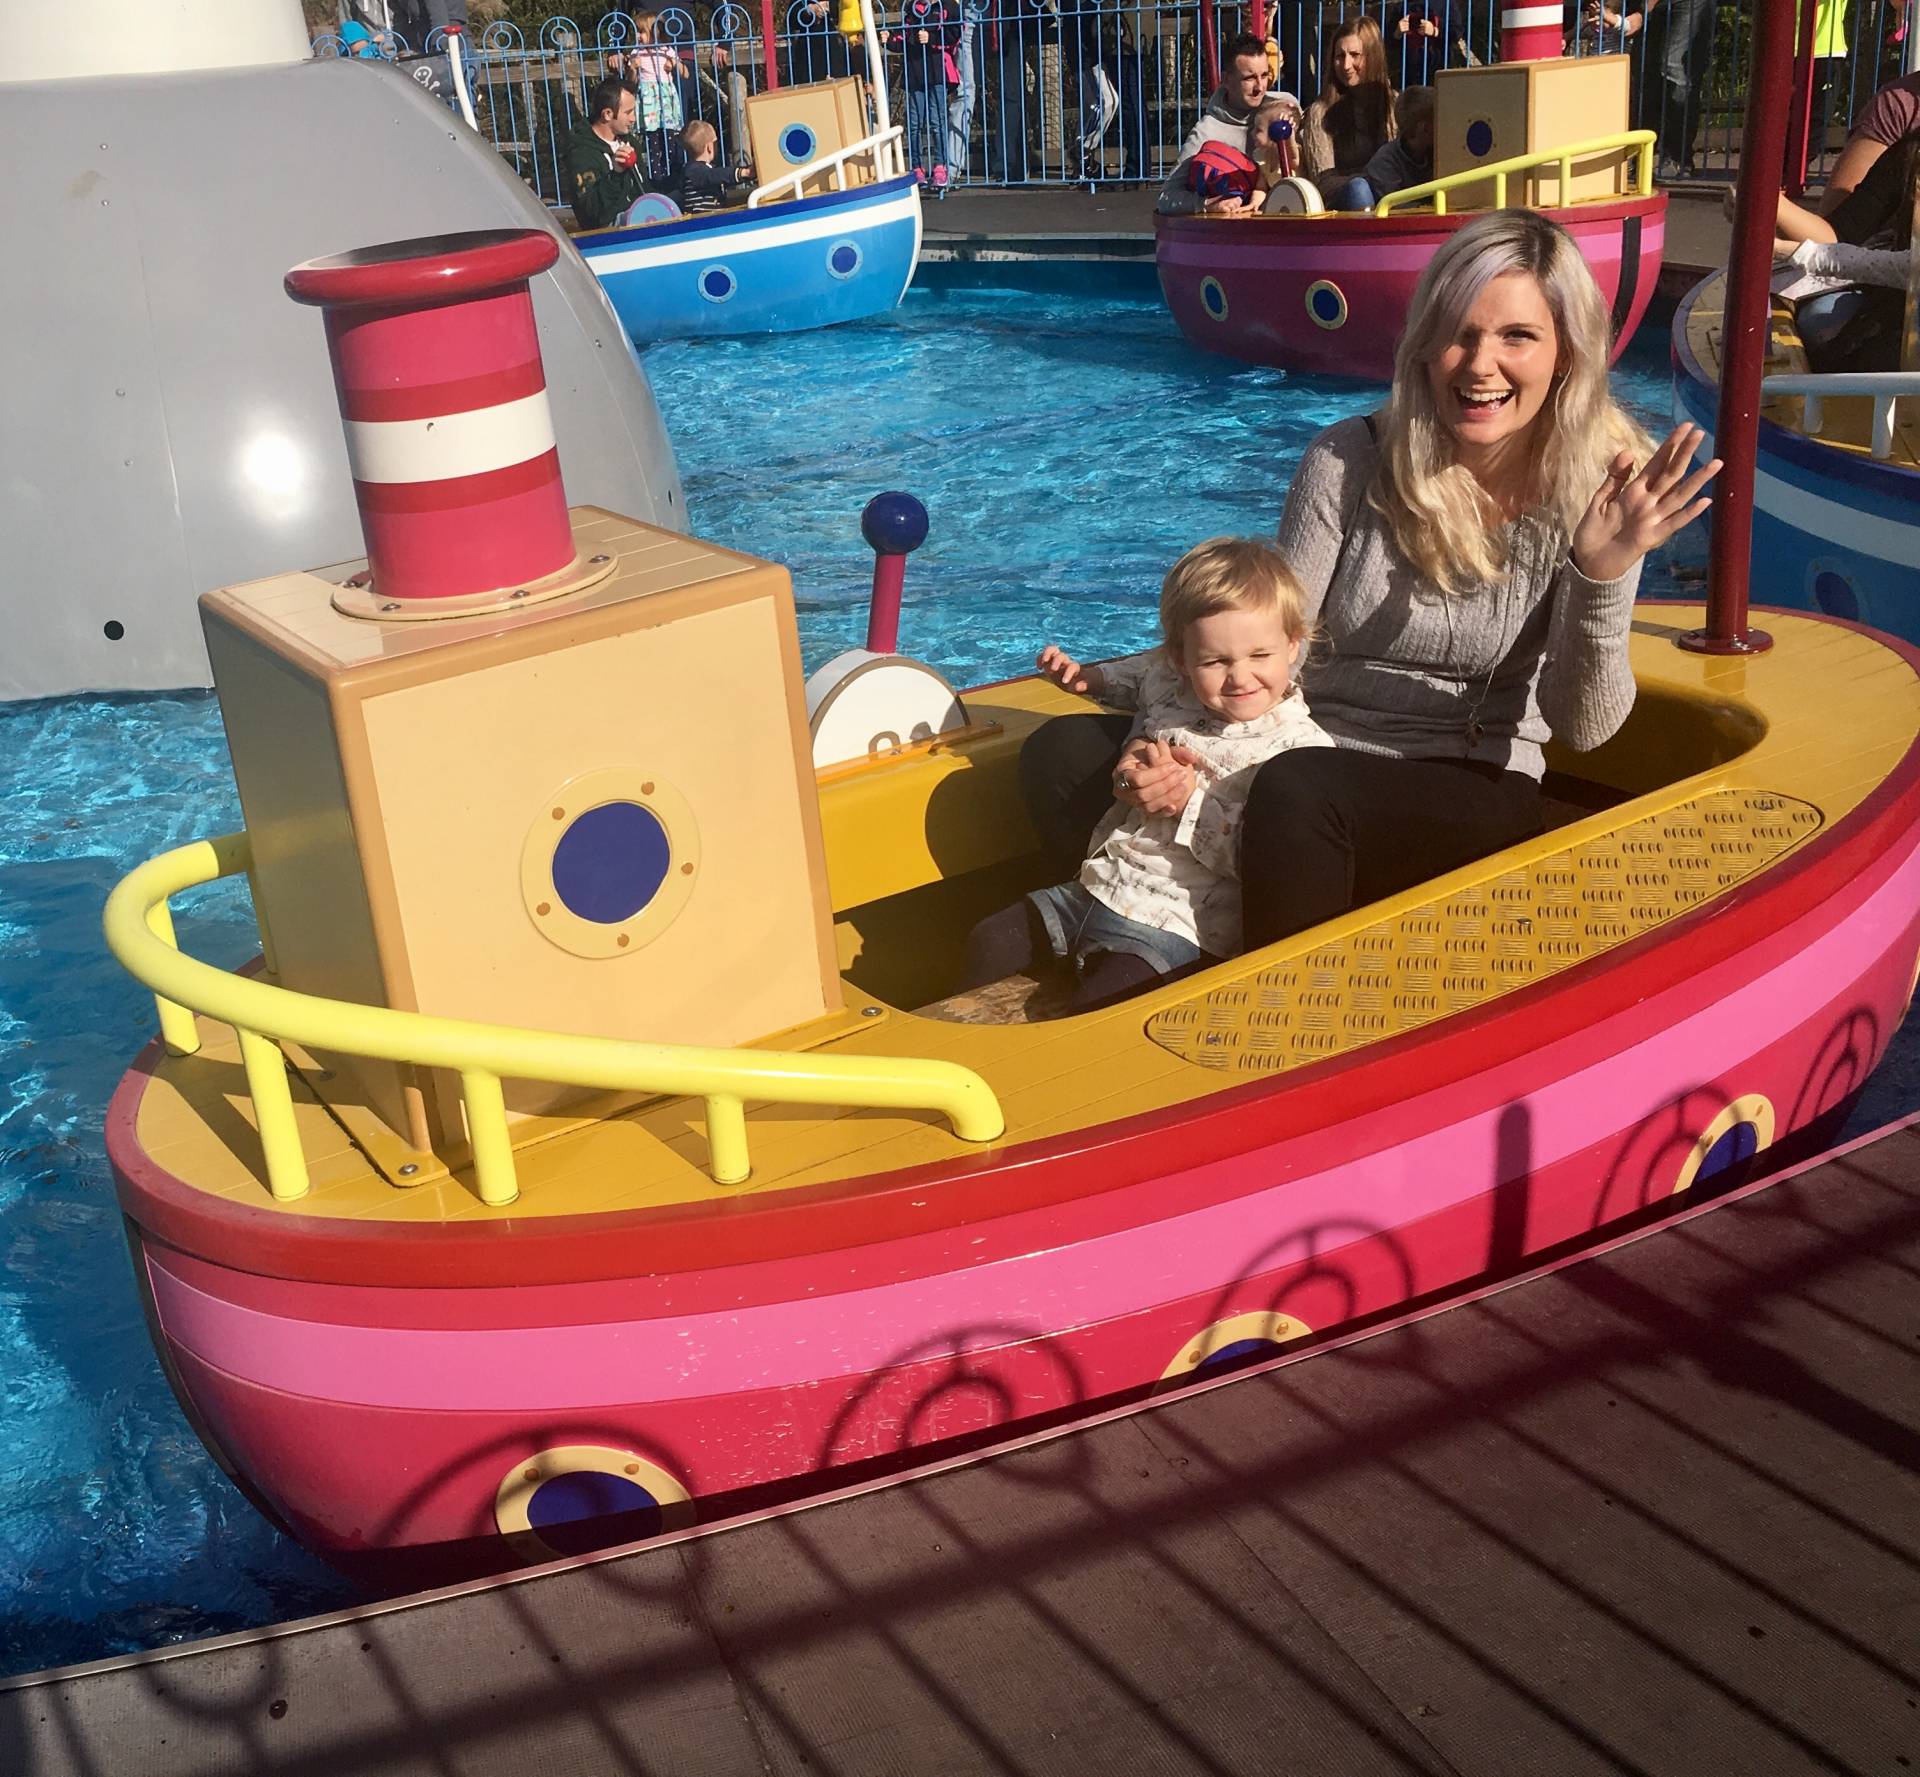 Peppa Pig World review